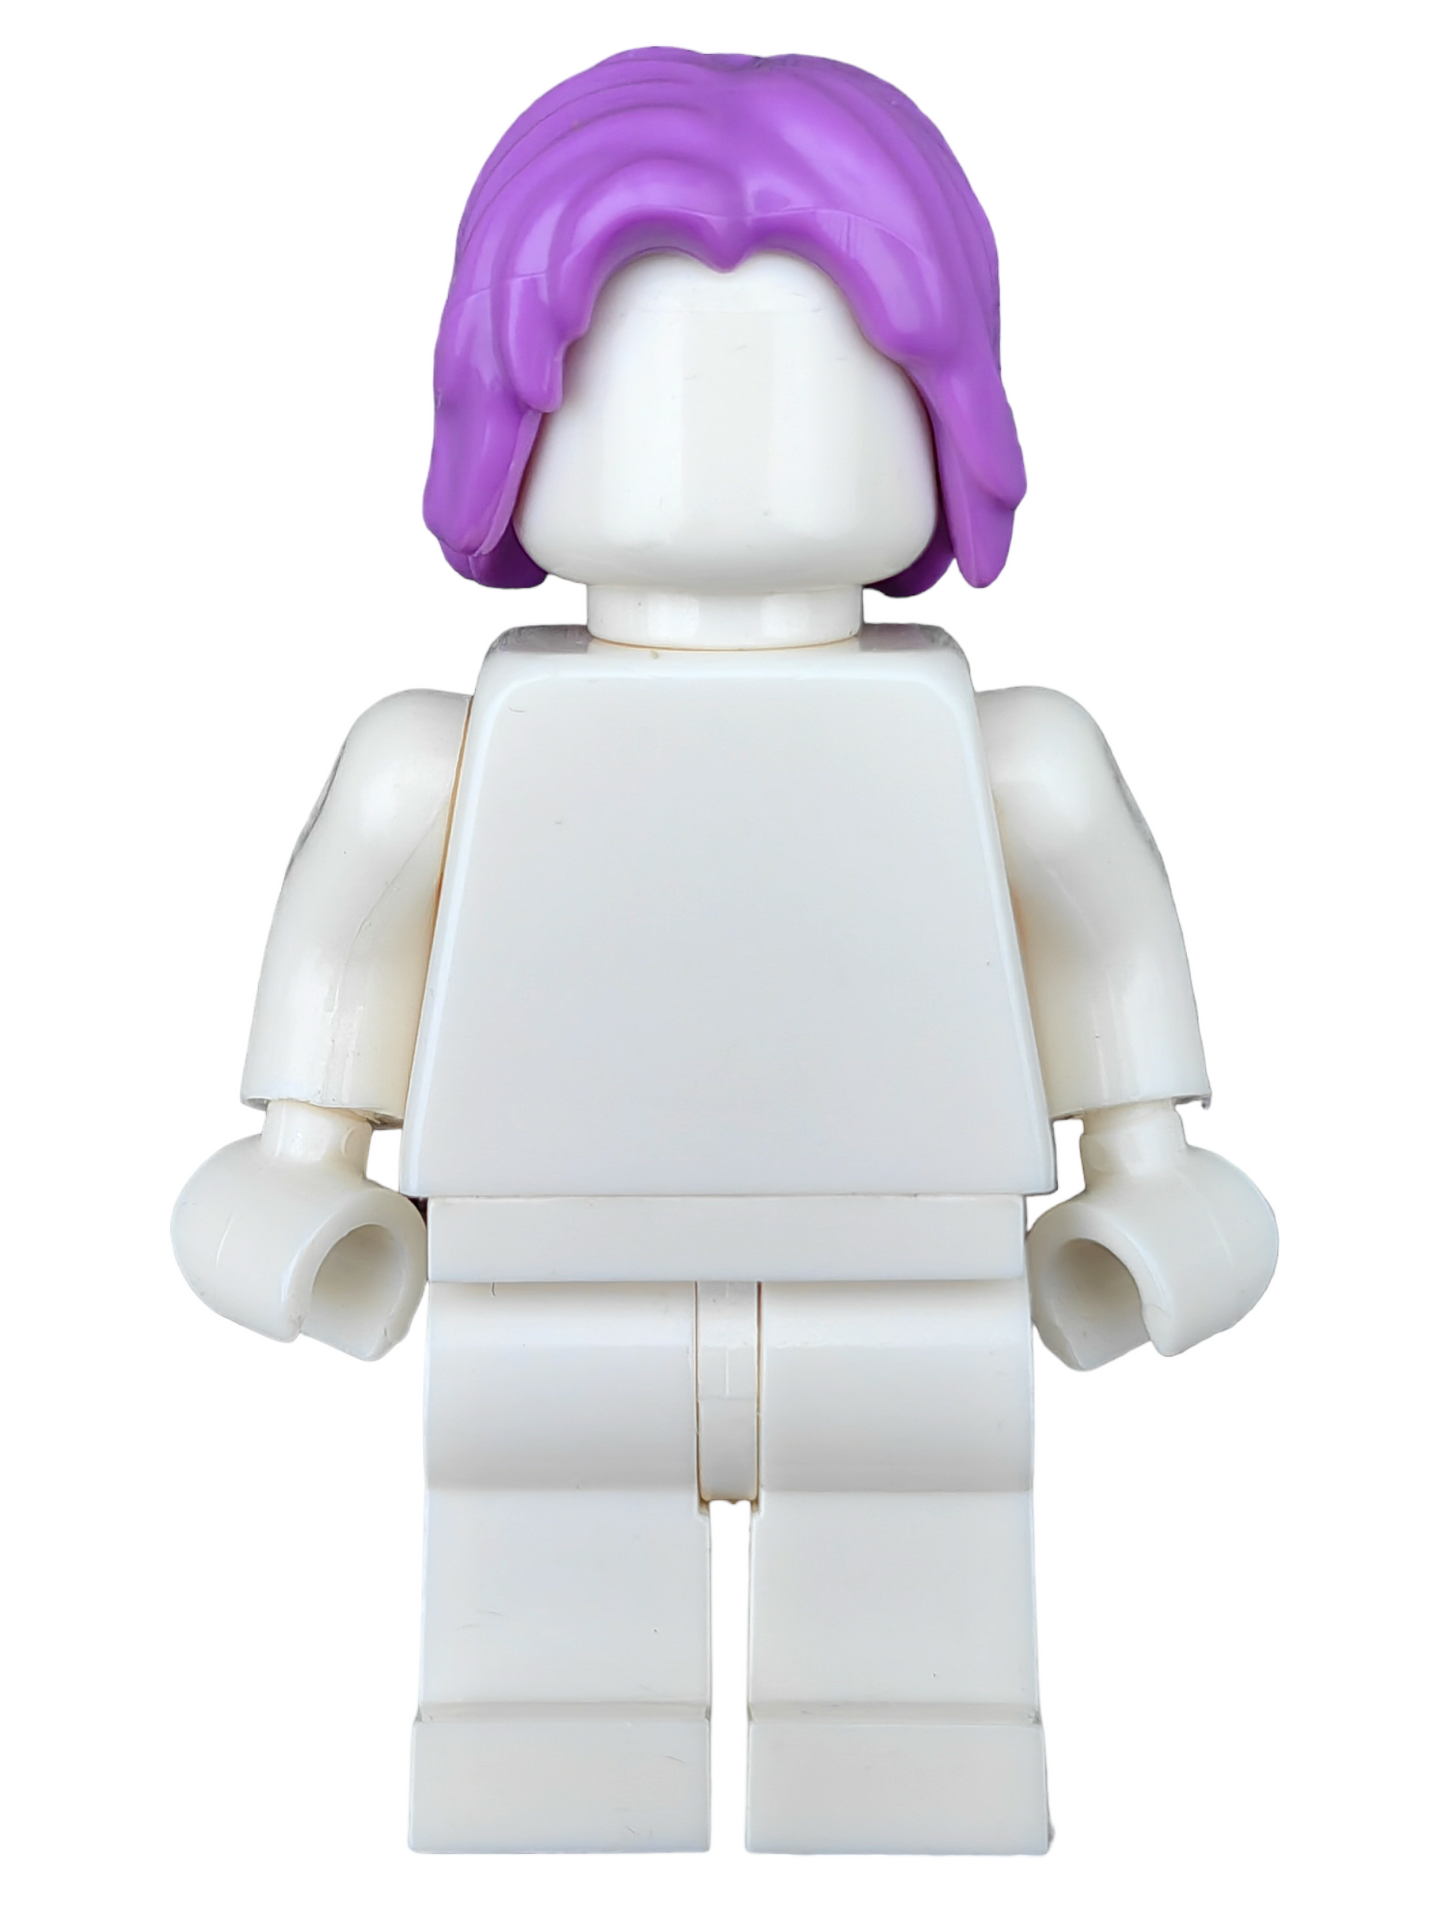 LEGO Wig, Purple Hair Medium Length with Middle Parting - UB1256